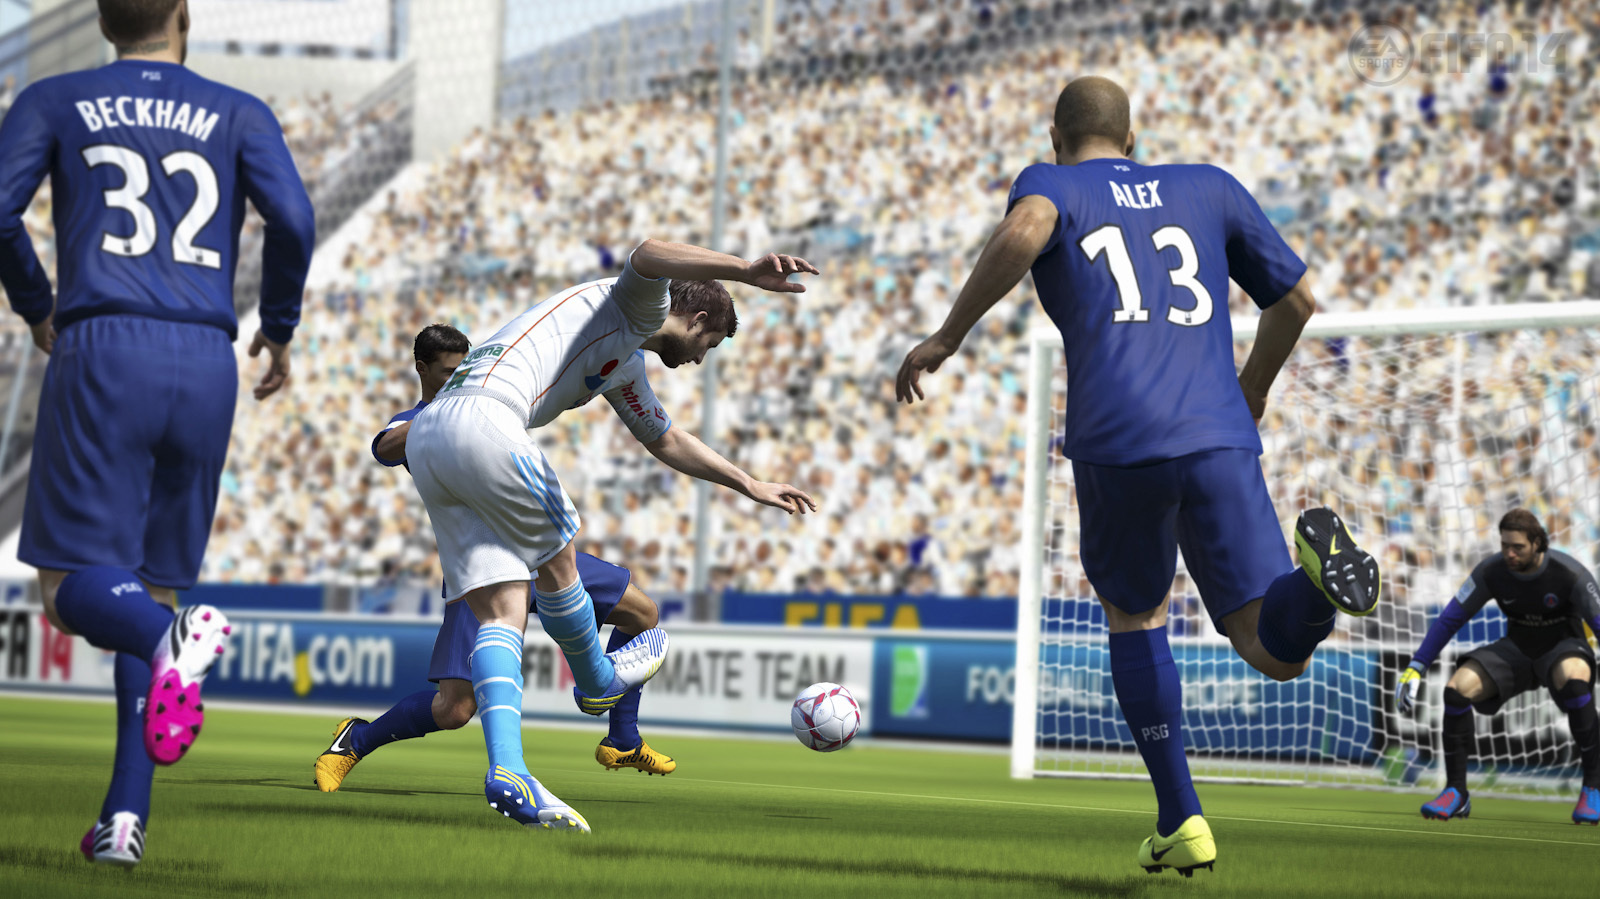 FIFA 14 Release Date revealed for Xbox 360, PS3 and PC